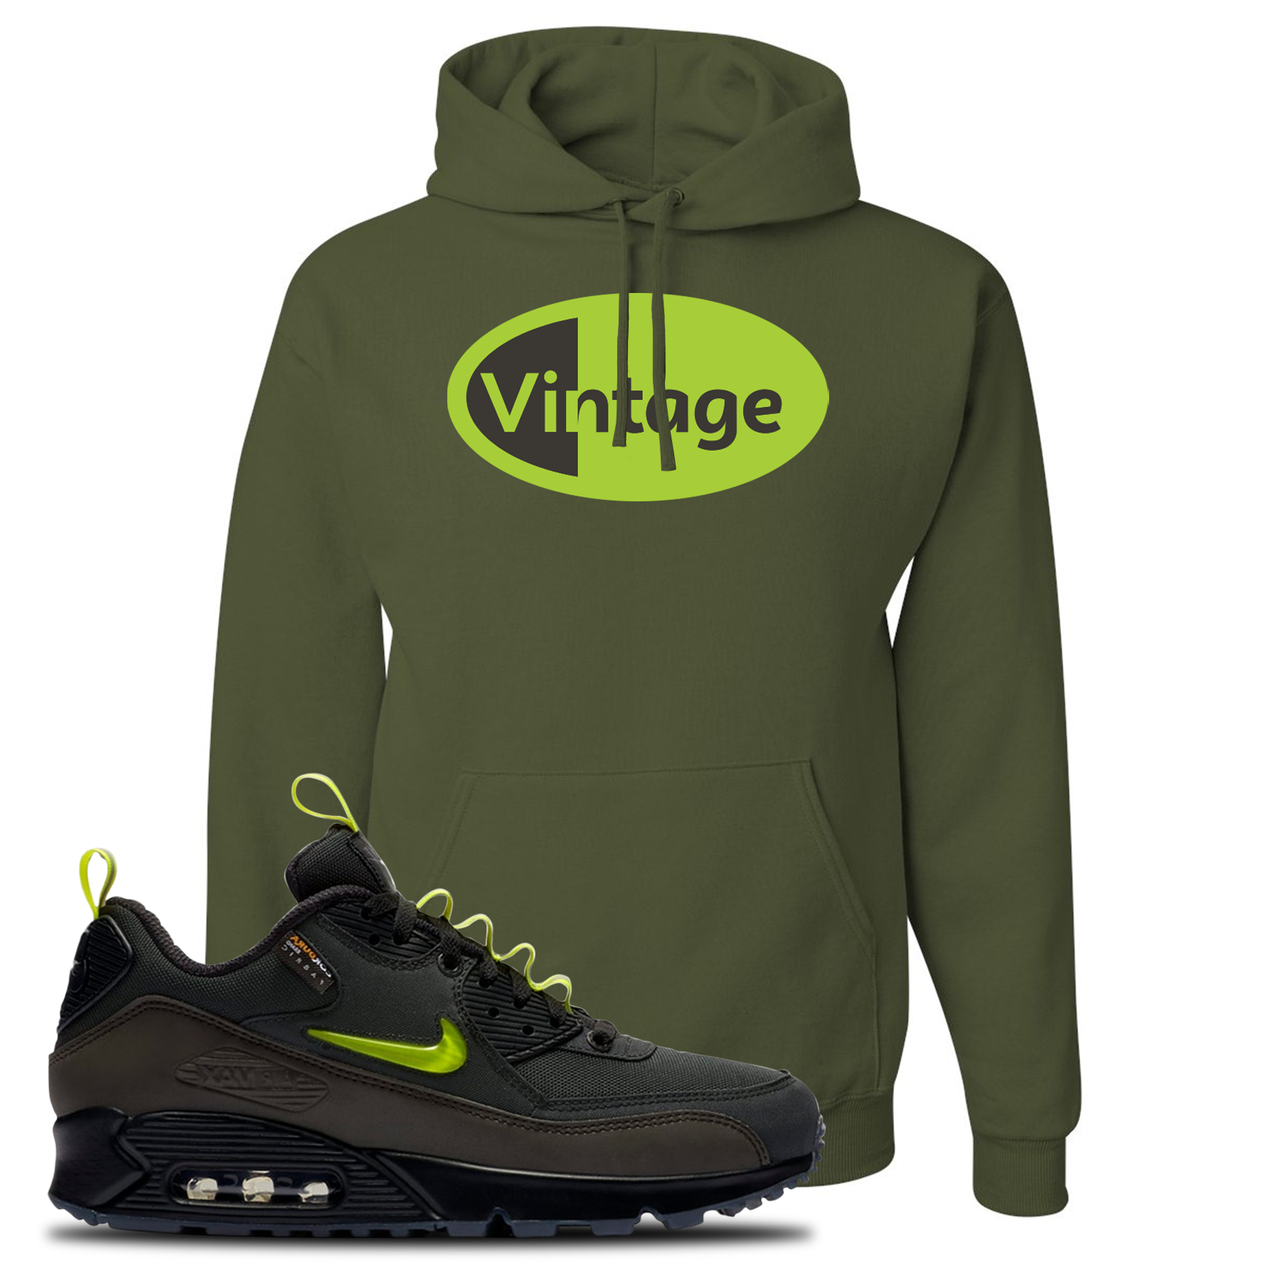 The Basement X Air Max 90 Manchester Vintage Oval Military Green Sneaker Hook Up Pullover Hoodie